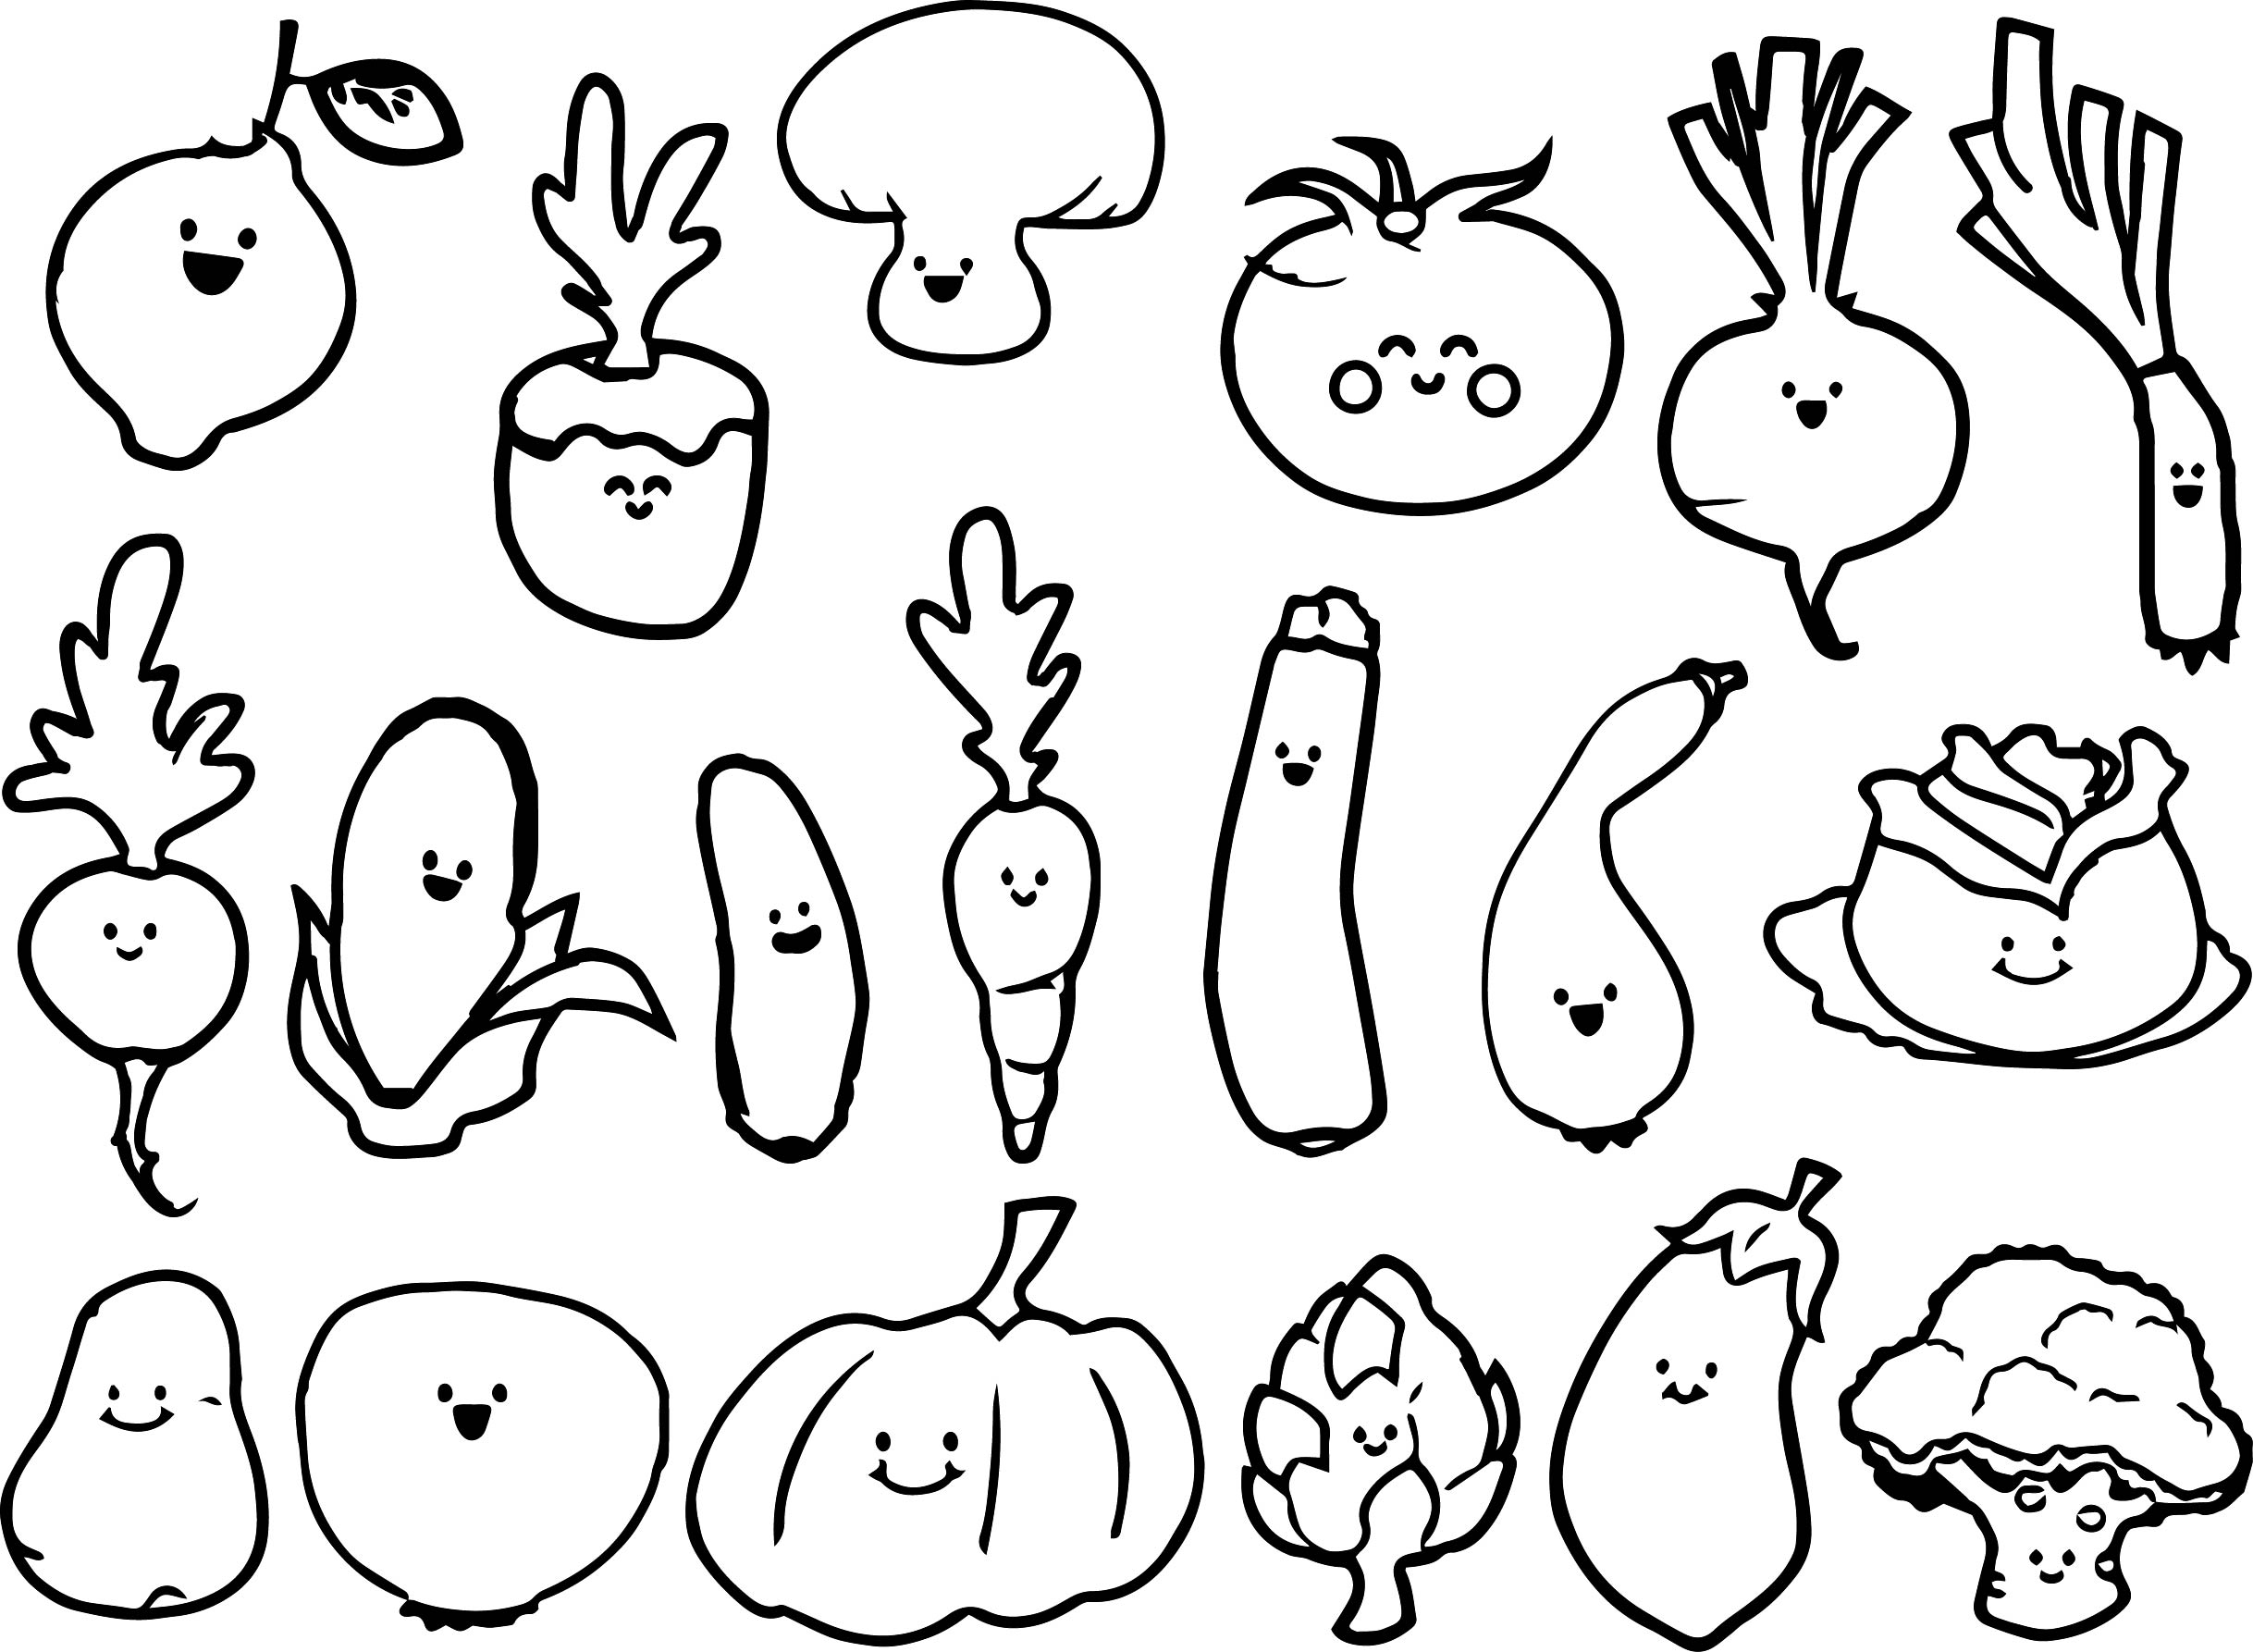 Cute Vegetables Coloring Page